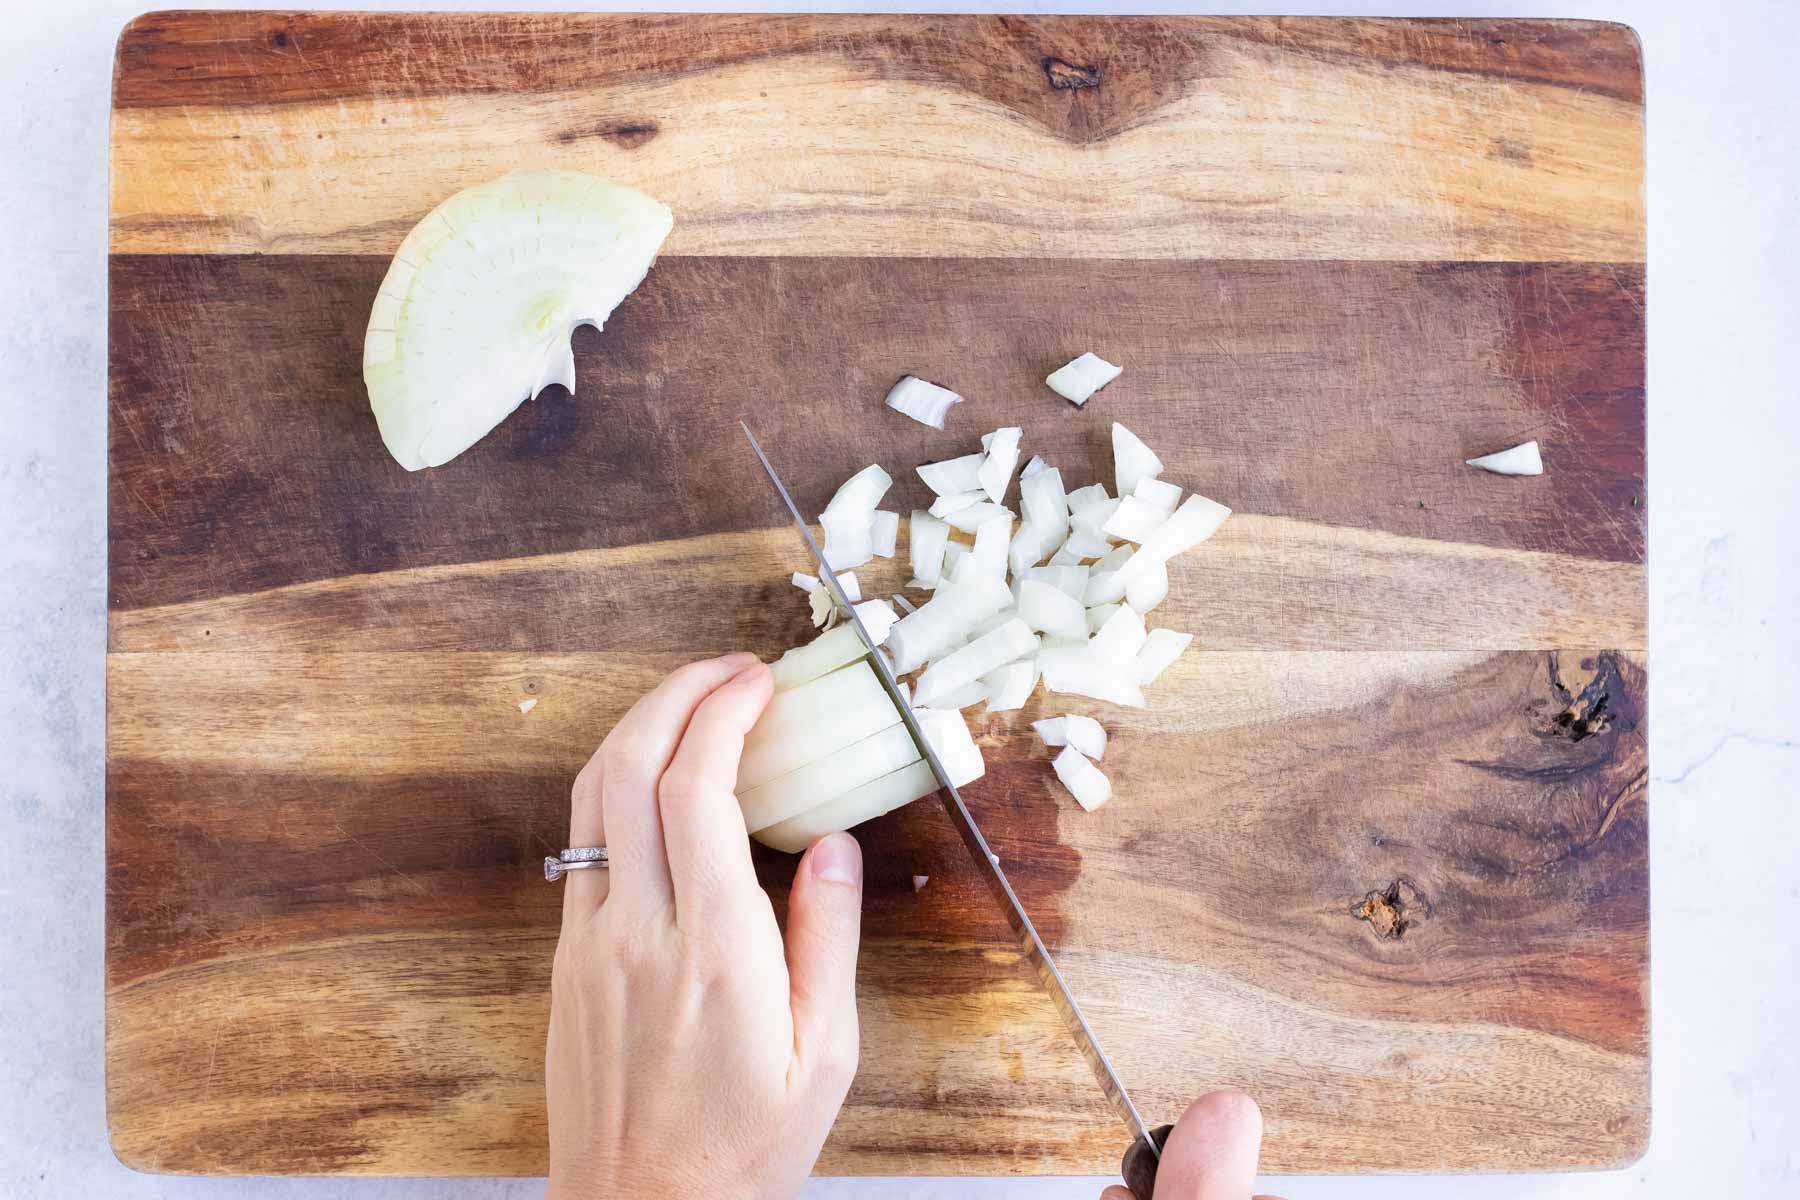 Onion slices are diced into small pieces on a cutting board.